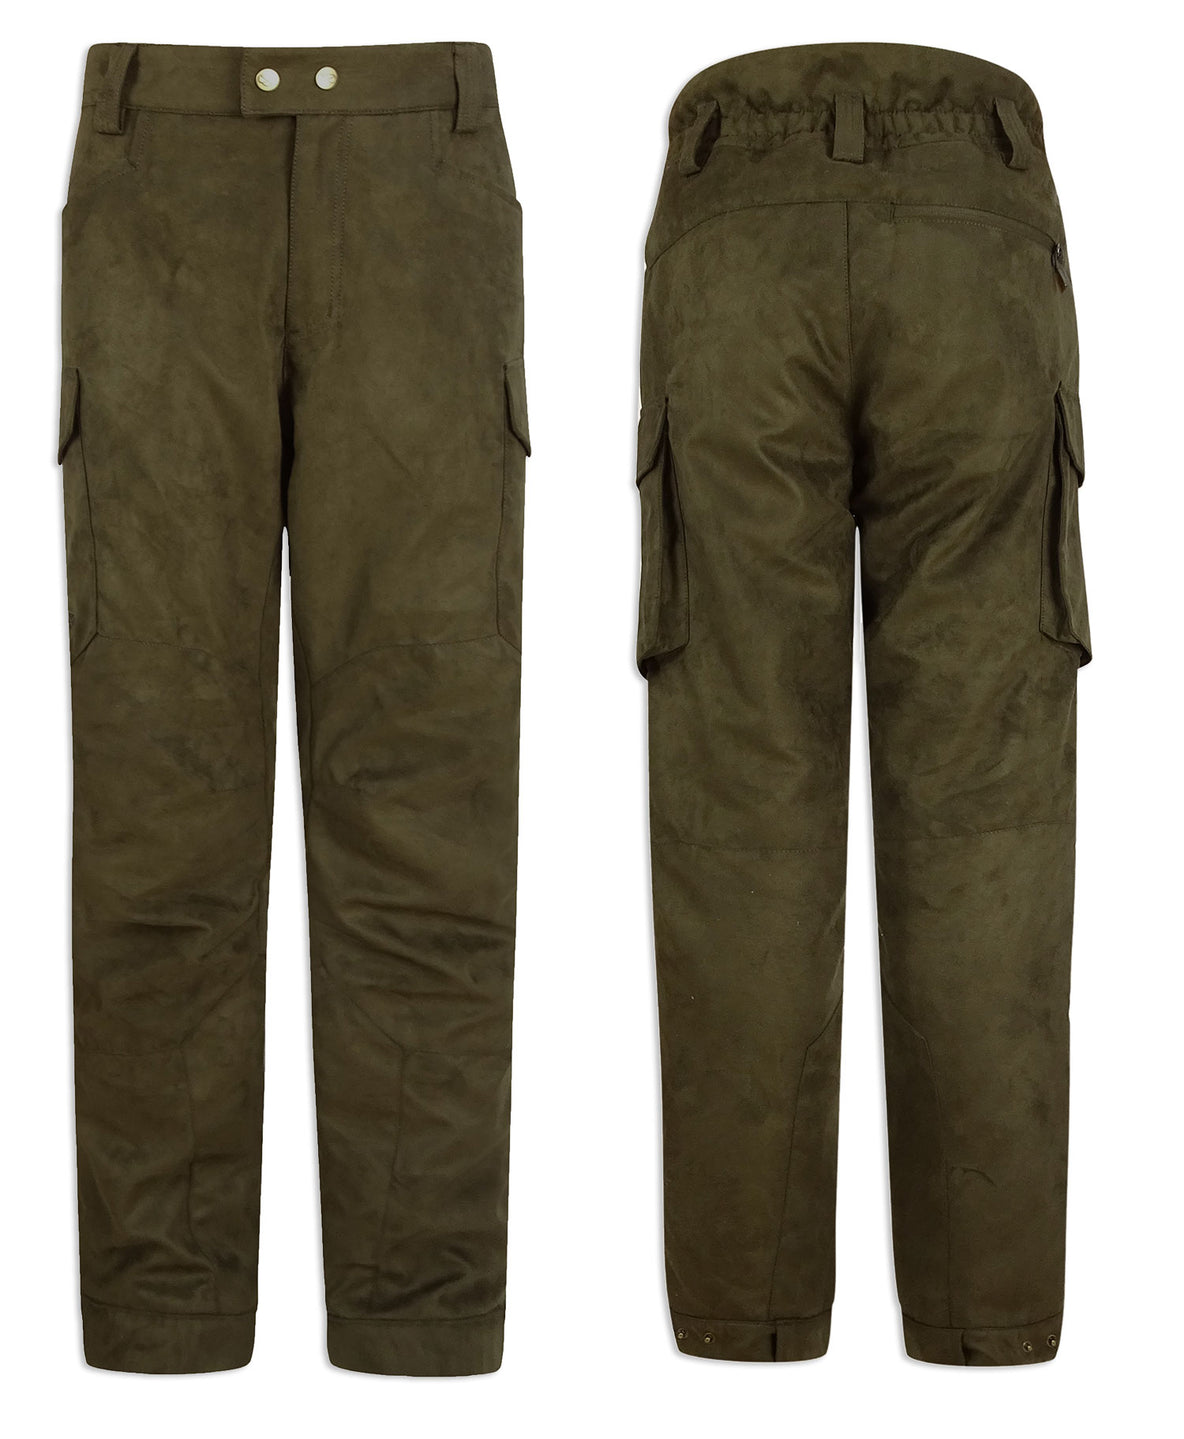 Back and side view Hoggs of Fife Rannoch Waterproof Shooting Trousers